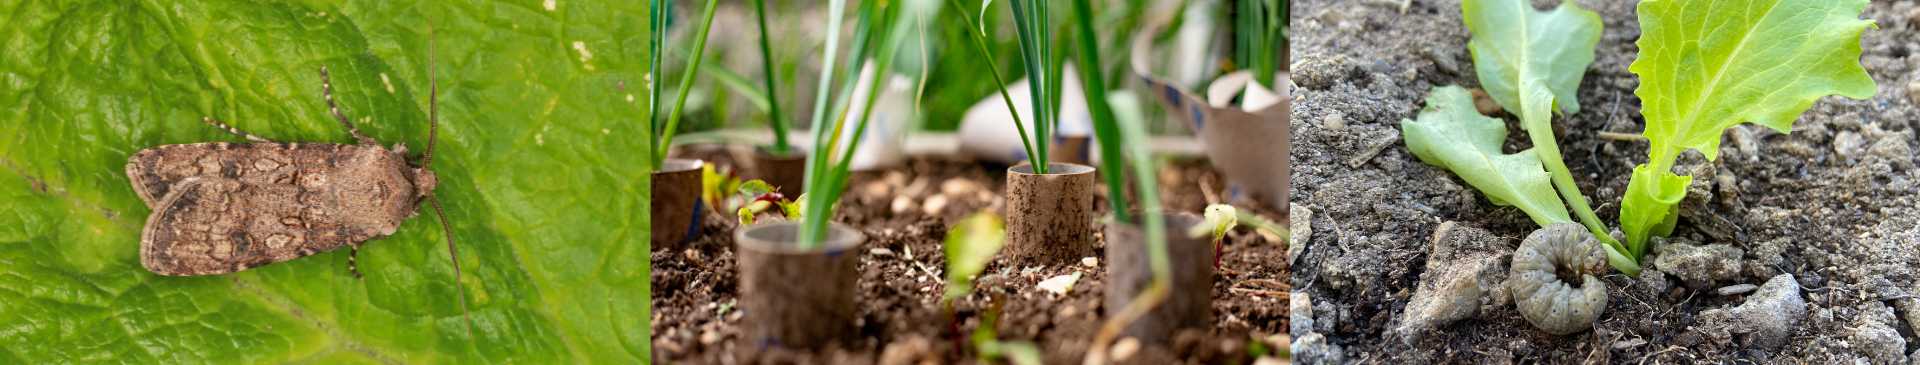 Cutworm: How to Protect Your Vulnerable Seedlings